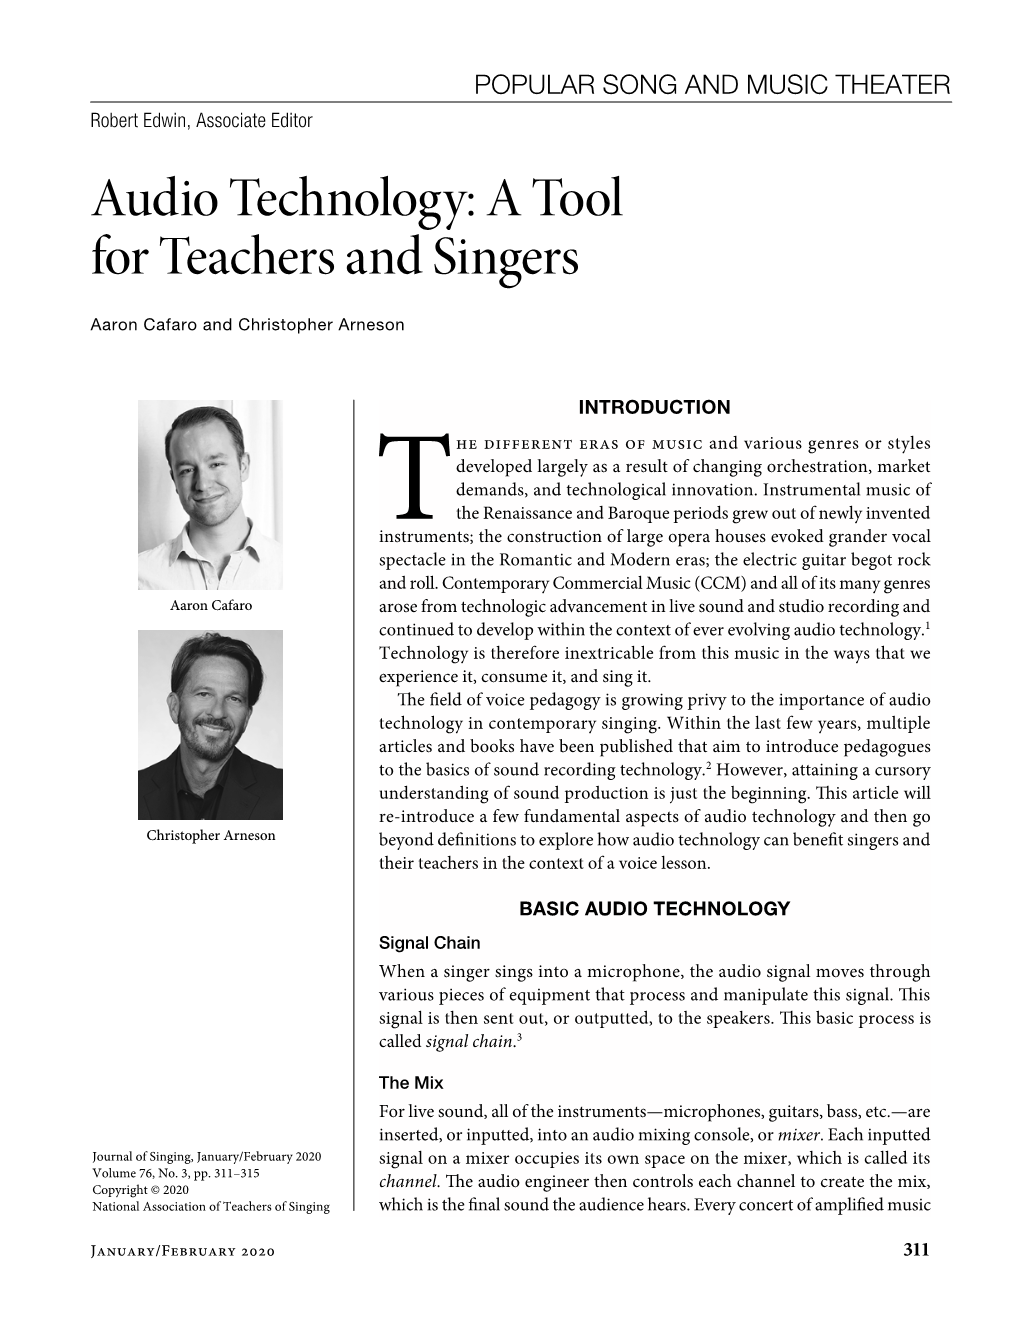 Audio Technology: a Tool for Teachers and Singers